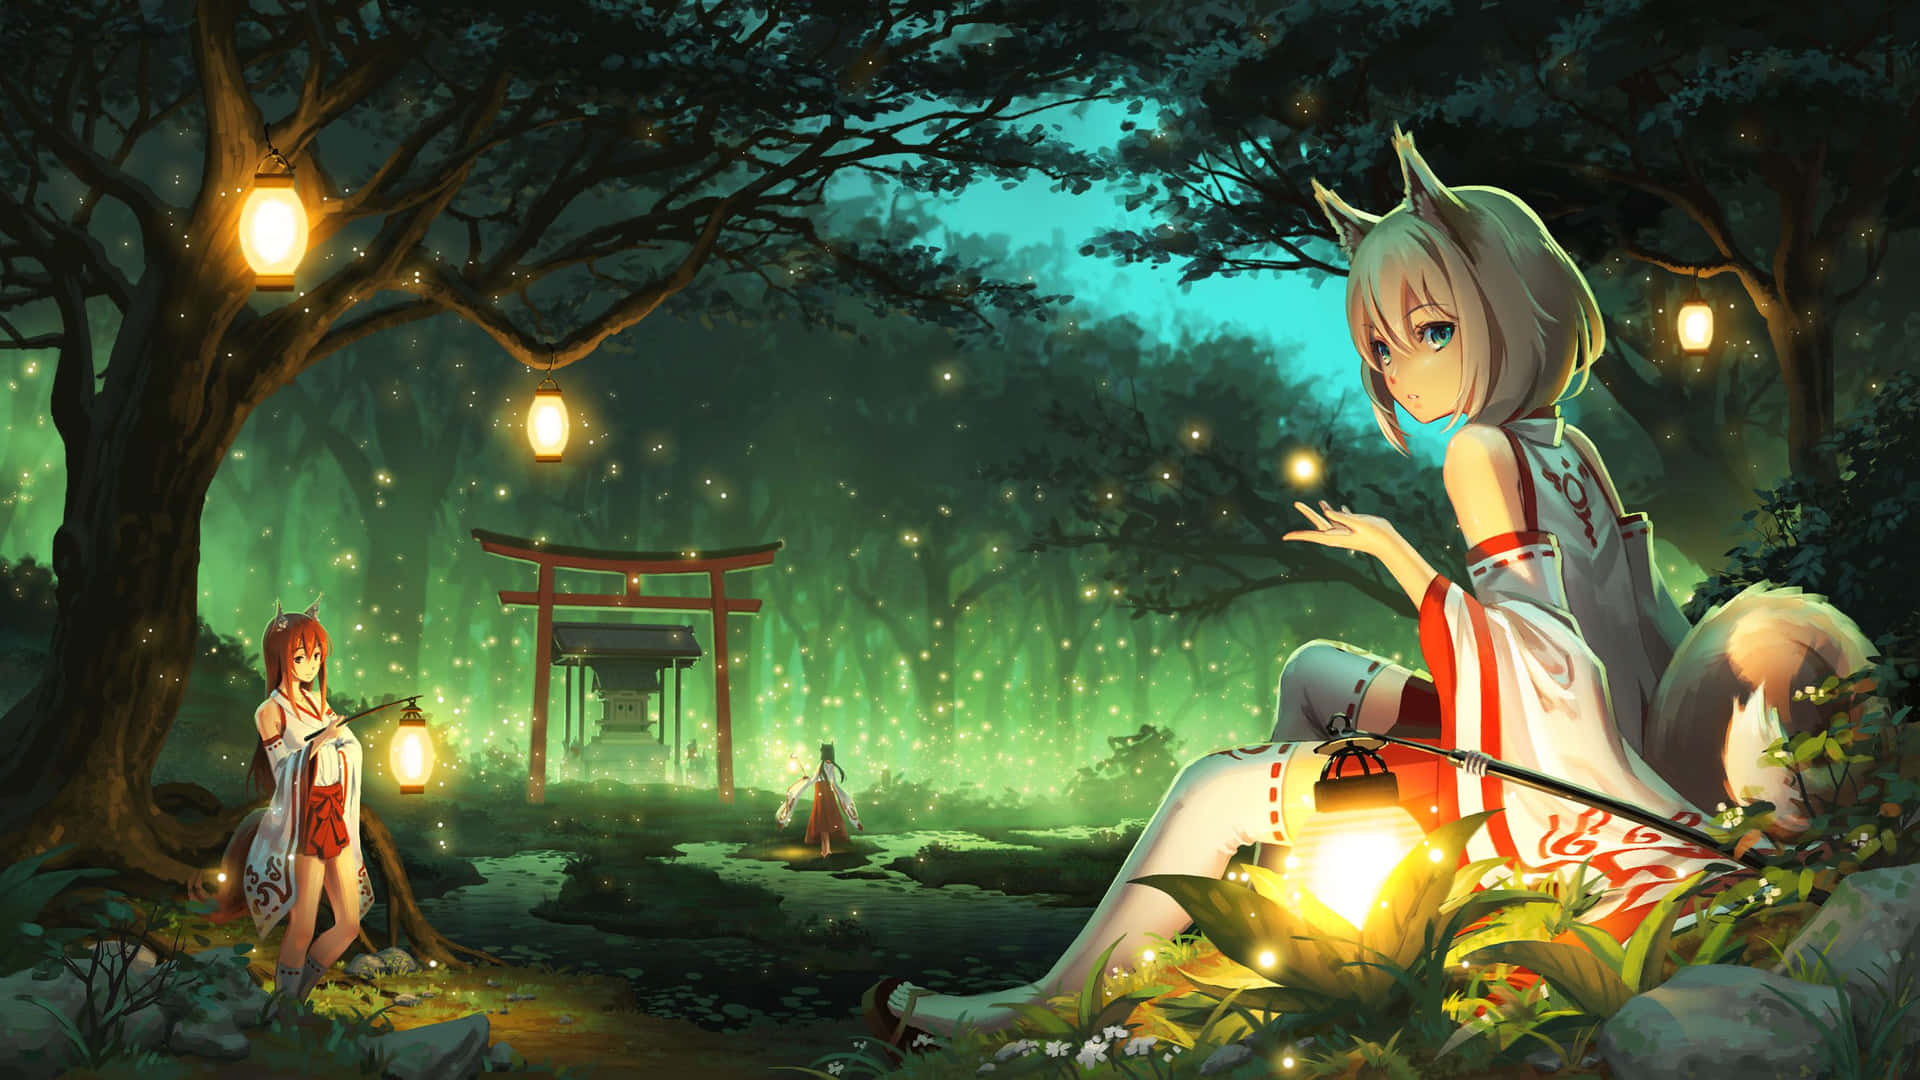 A Girl Sitting In The Woods With Lanterns